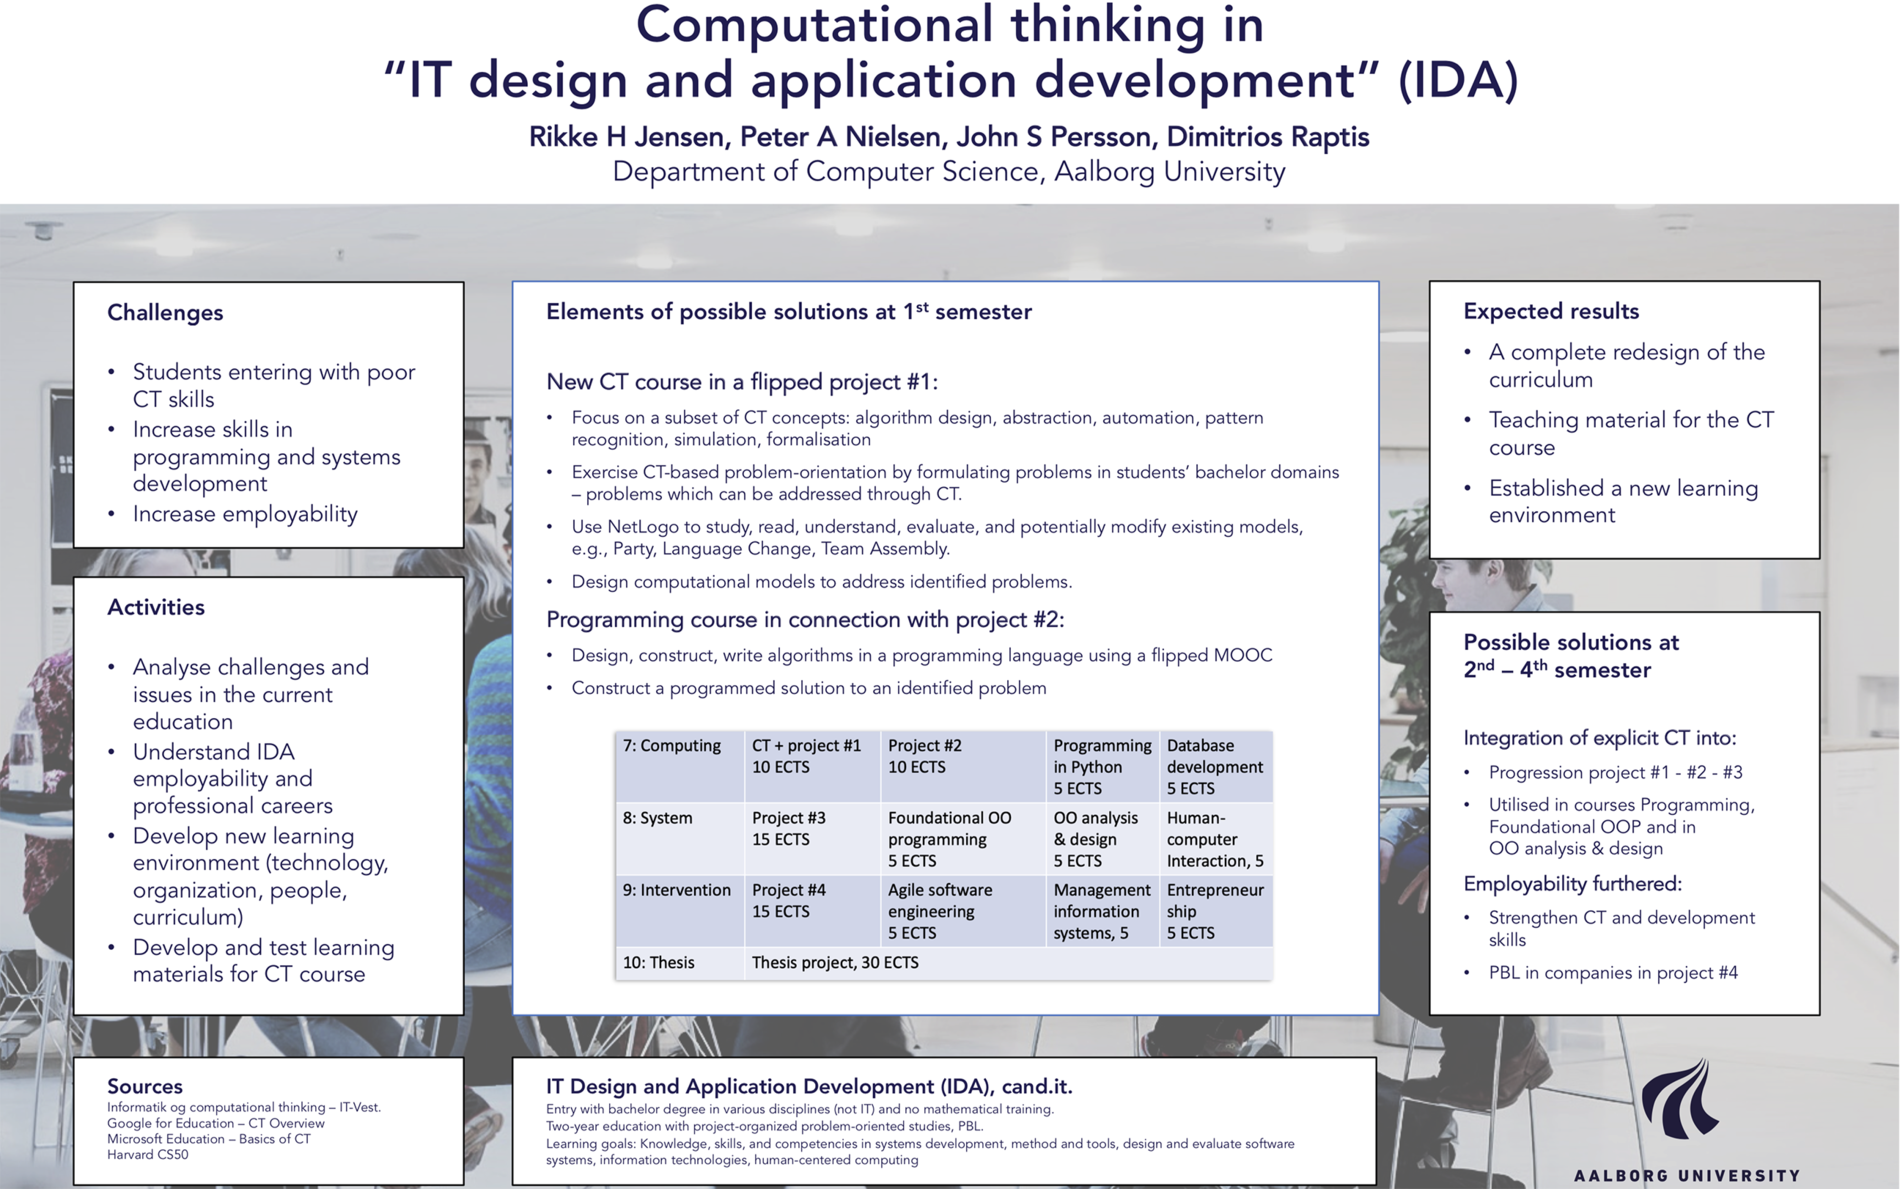 Link til pdf med poster for Computational Thinking in IT Design and Application Development, AAU